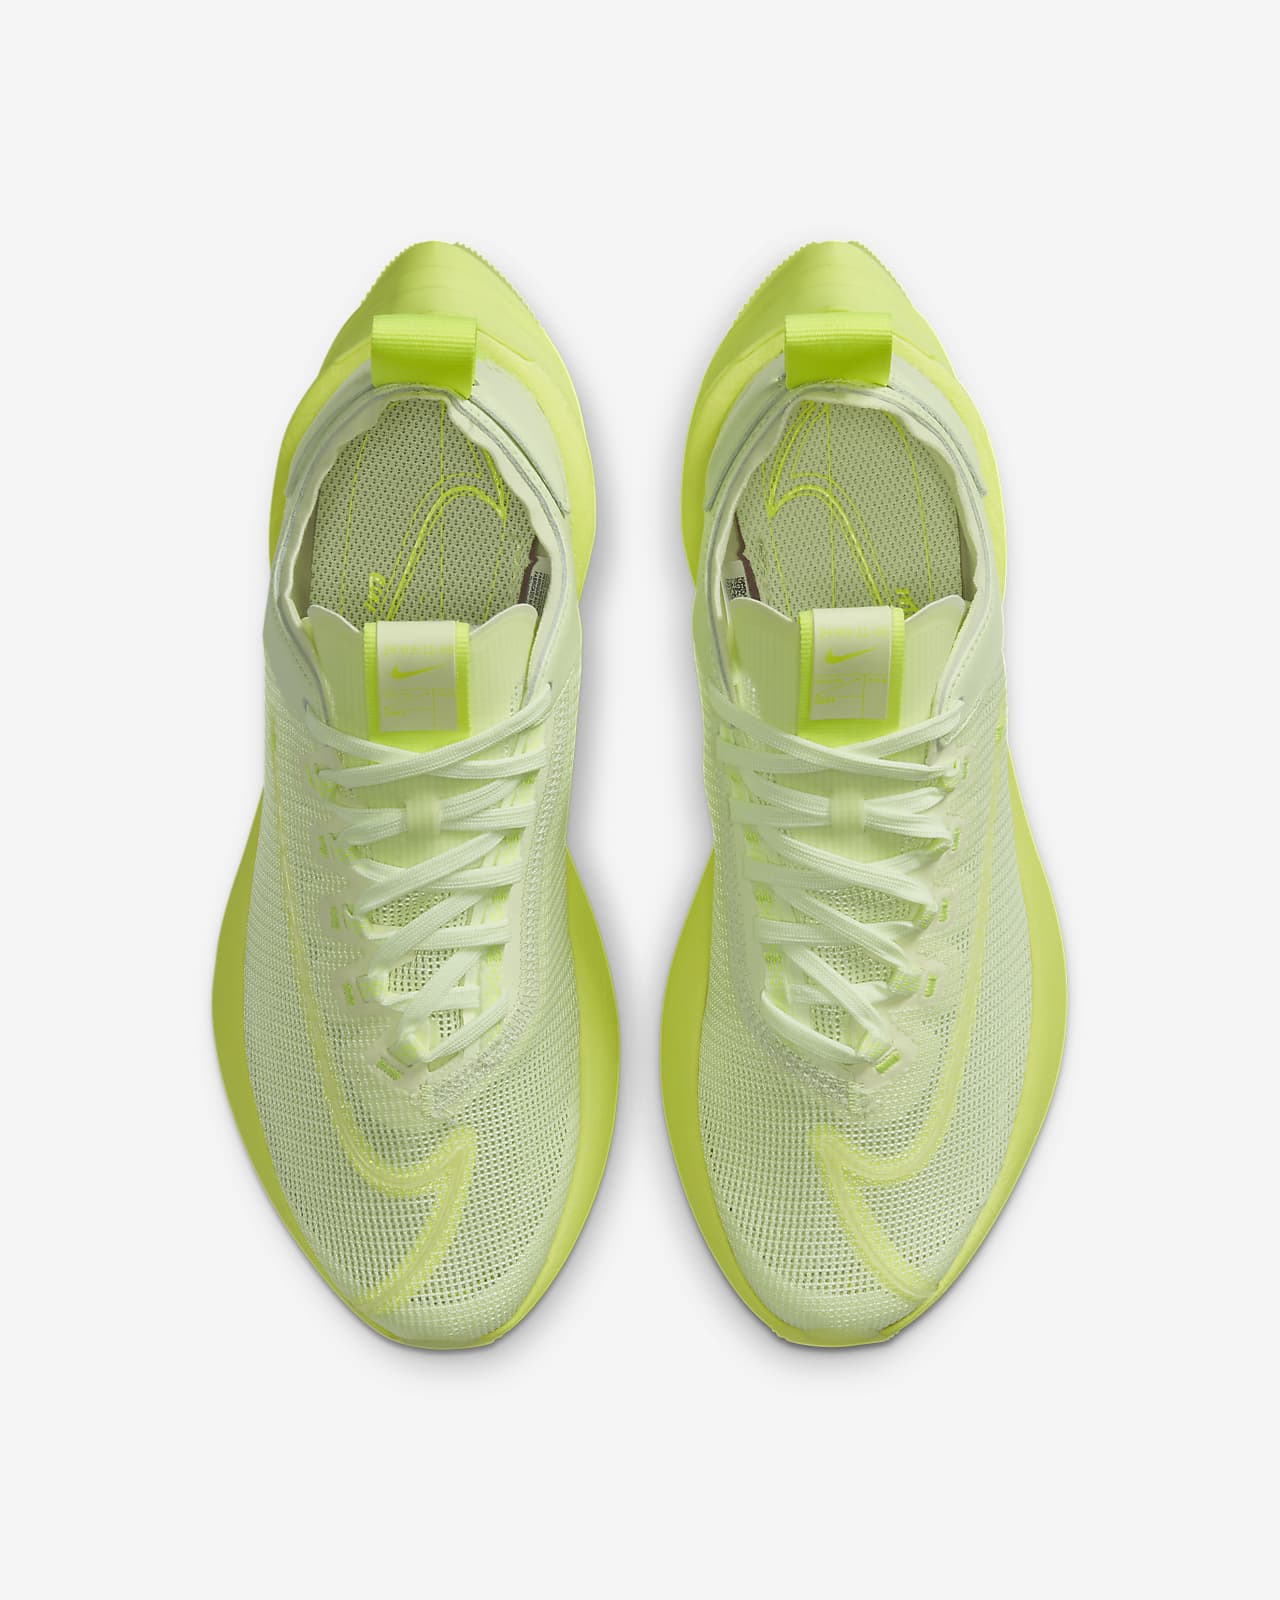 nike zoom double stacked volt